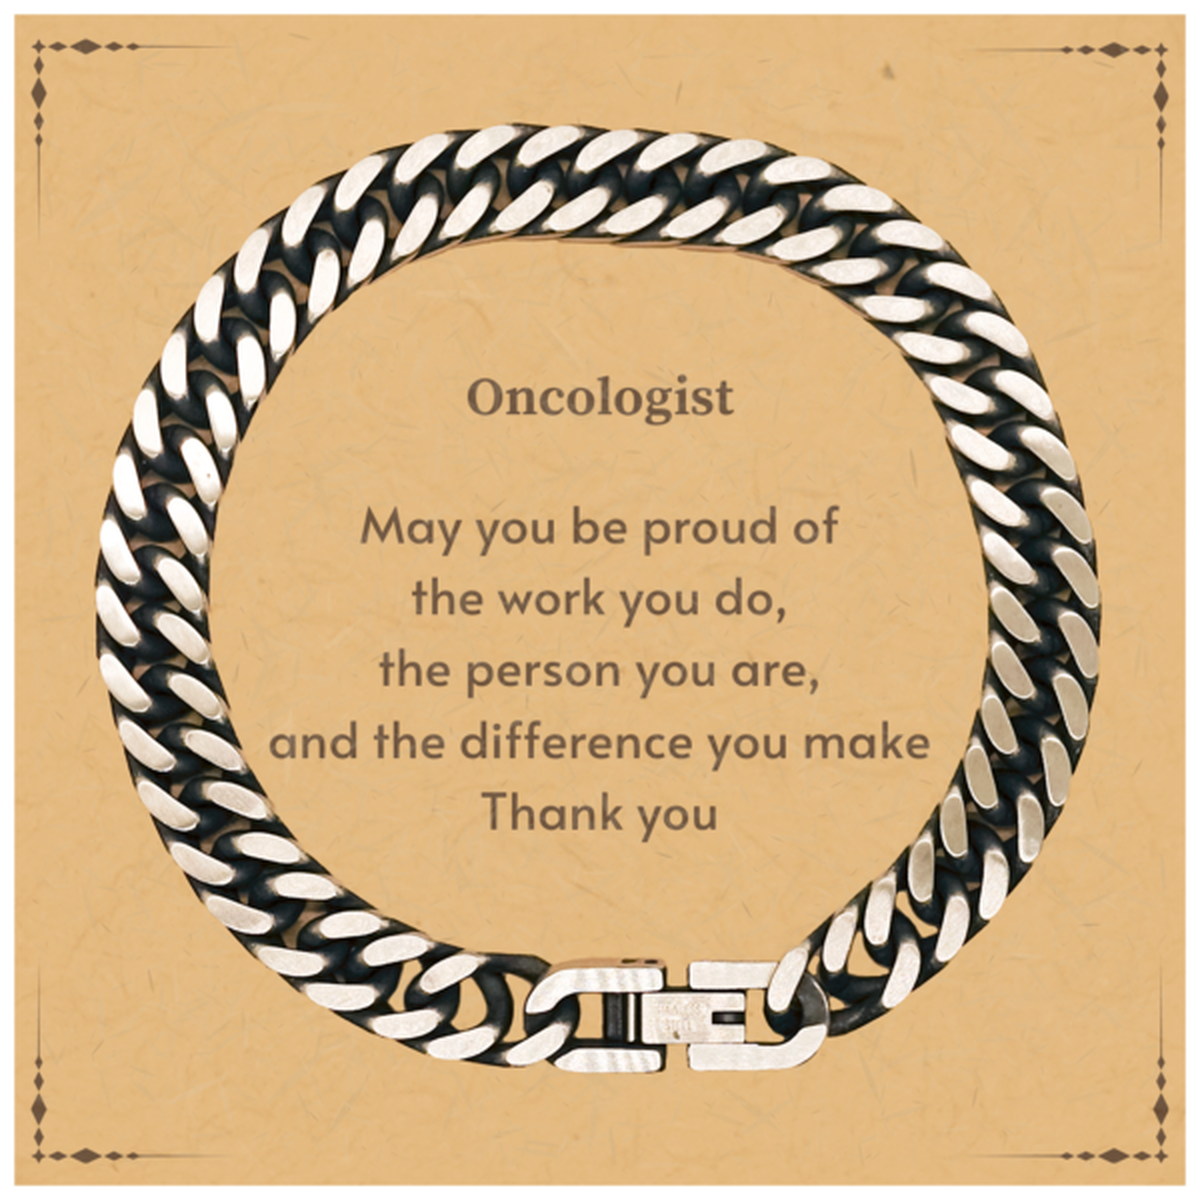 Heartwarming Cuban Link Chain Bracelet Retirement Coworkers Gifts for Oncologist, Oncologist May You be proud of the work you do, the person you are Gifts for Boss Men Women Friends